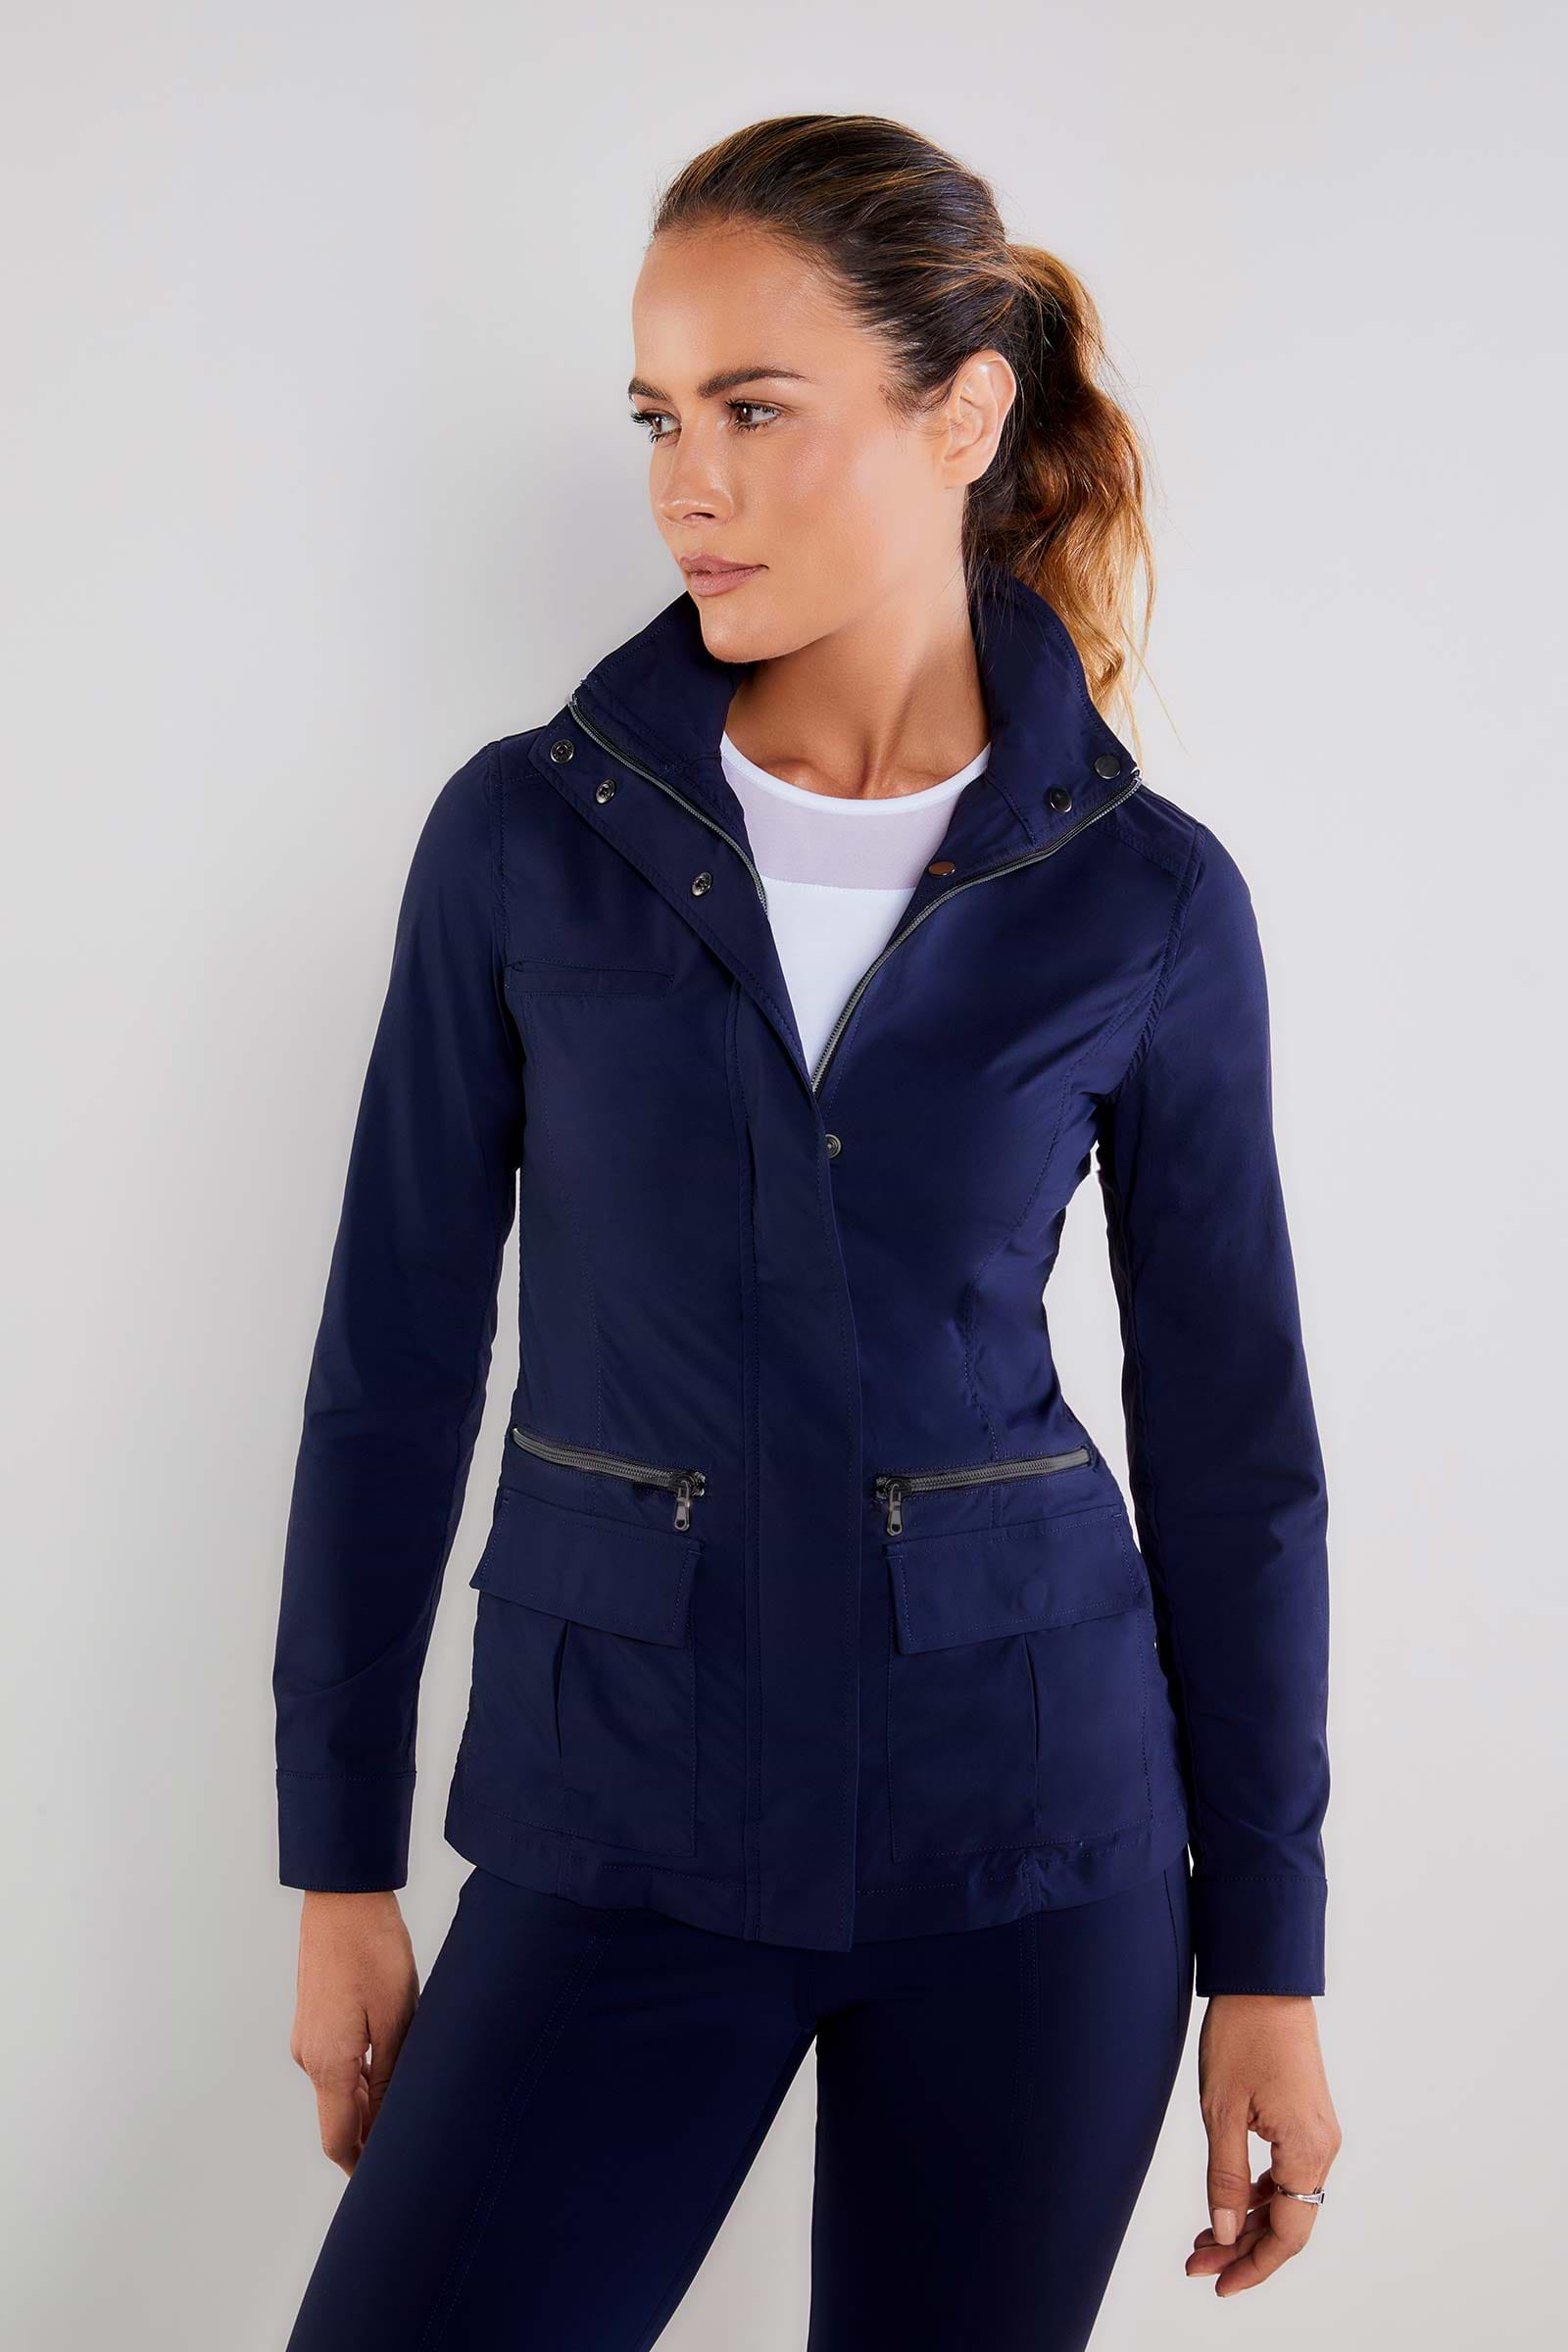 The Best Travel Safari Jacket. Woman Showing the Side Profile of a Safari Jacket in Navy